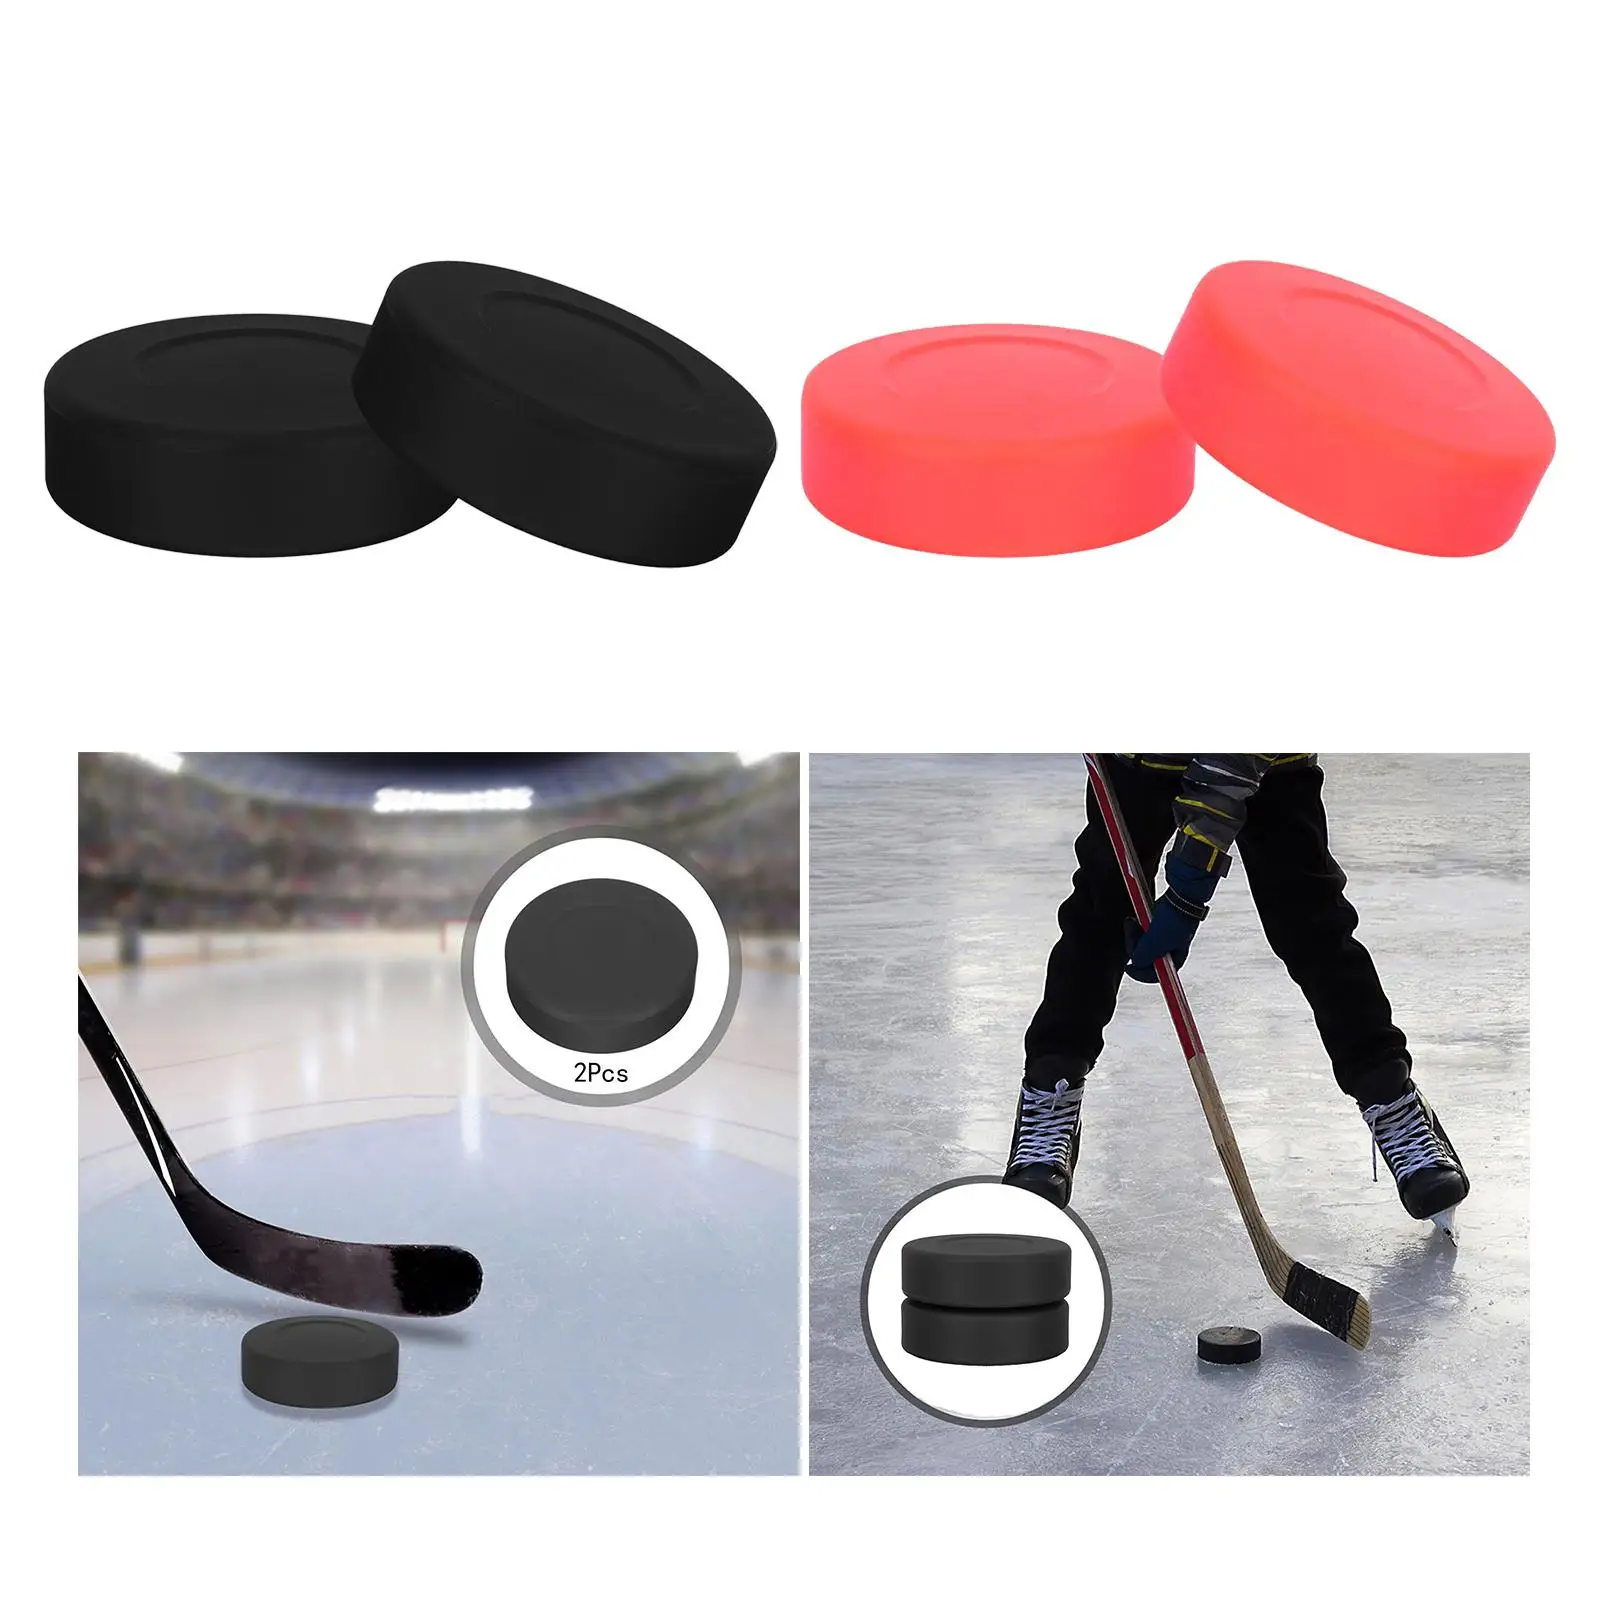 2 Pieces Ice Hockey Puck Rubber Hockey Puck Wear Resistant Professional